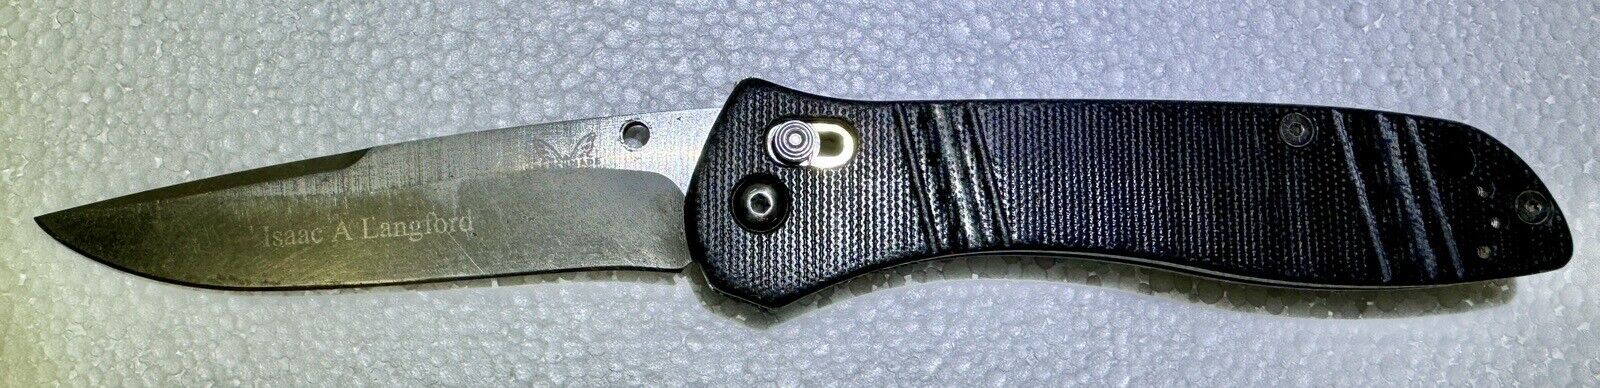 Benchmade McHenry & Williams 710 G10 Axis Lock w/ D2 3.9\